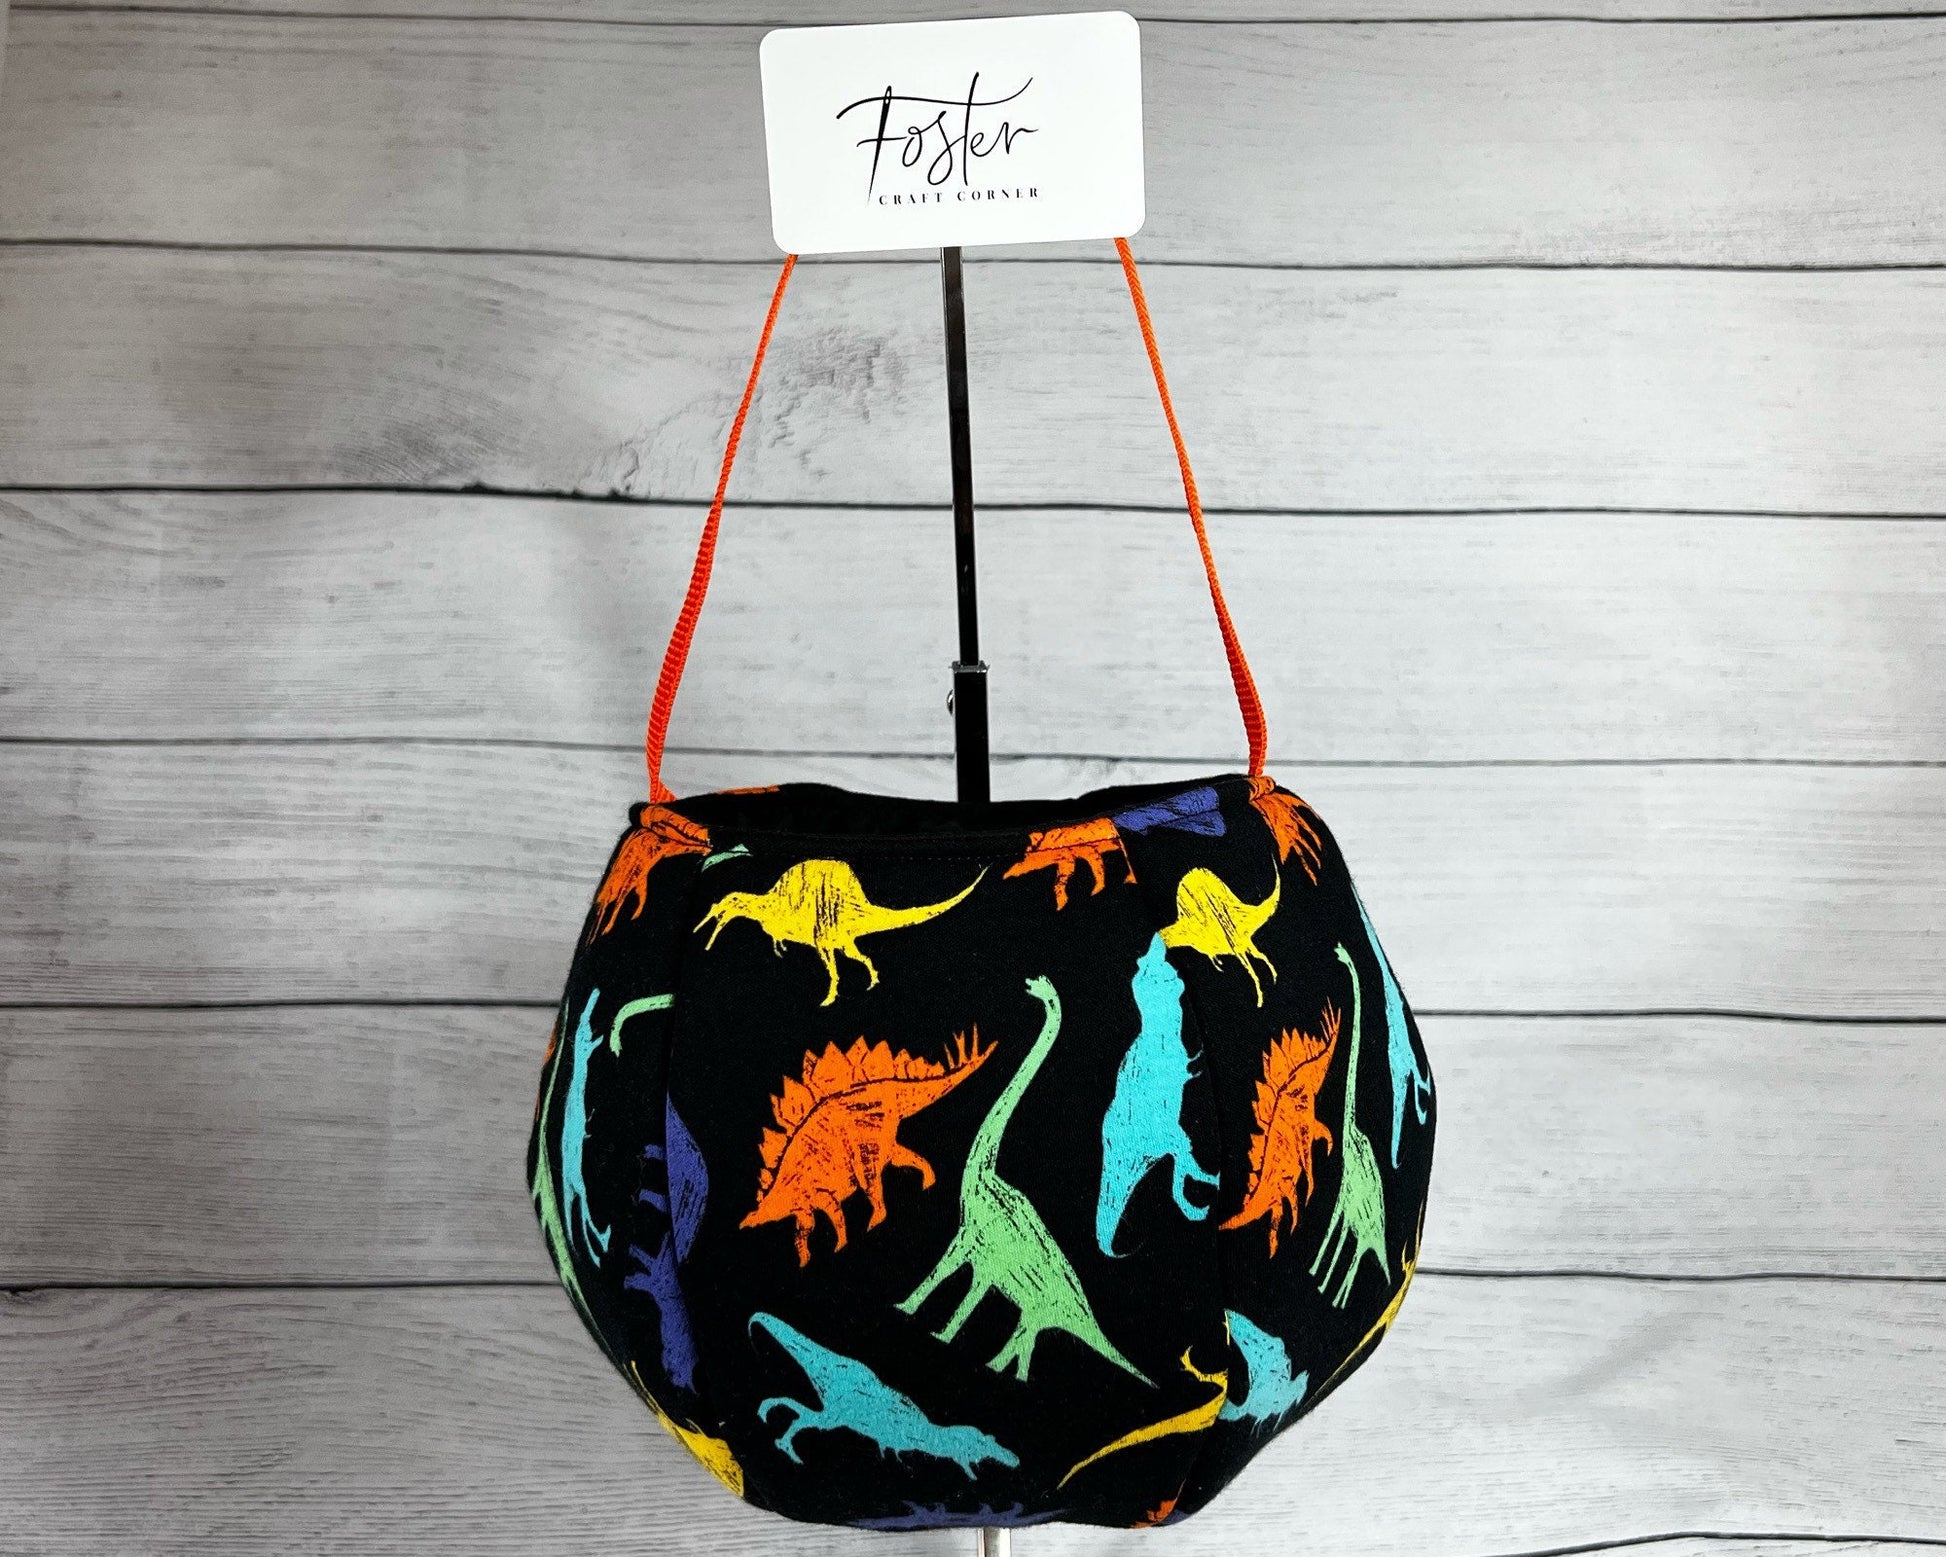 Dinosaur Stamp Tote Bag Bag - Tote - Stegosaurs - Parks - T-Rex - Dinos - Triceritops - Everyday - Holiday - Easter - Halloween - Party